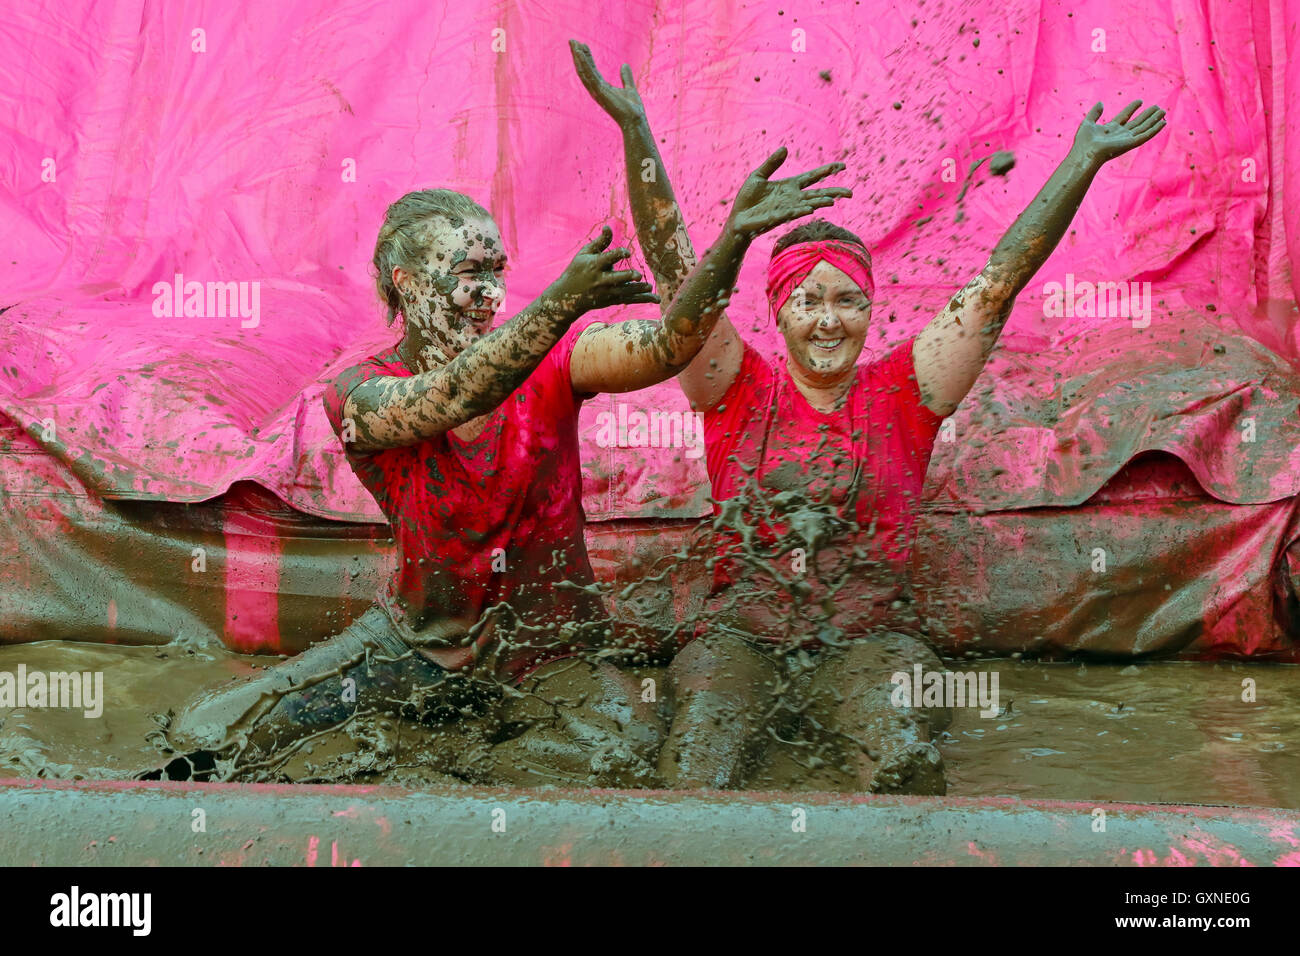 Glasgow, Scotland, UK. 17th September, 2016. Thousands of women took part in the Bellahouston Park Pretty Muddy 5k across obstacles, through pipes, across fields on spacehoppers and over mud slides to raise awareness and funds for Cancer Research UK. Many ran in teams and with friends and all finished laughing and very, very muddy! Credit:  Findlay/Alamy Live News Stock Photo